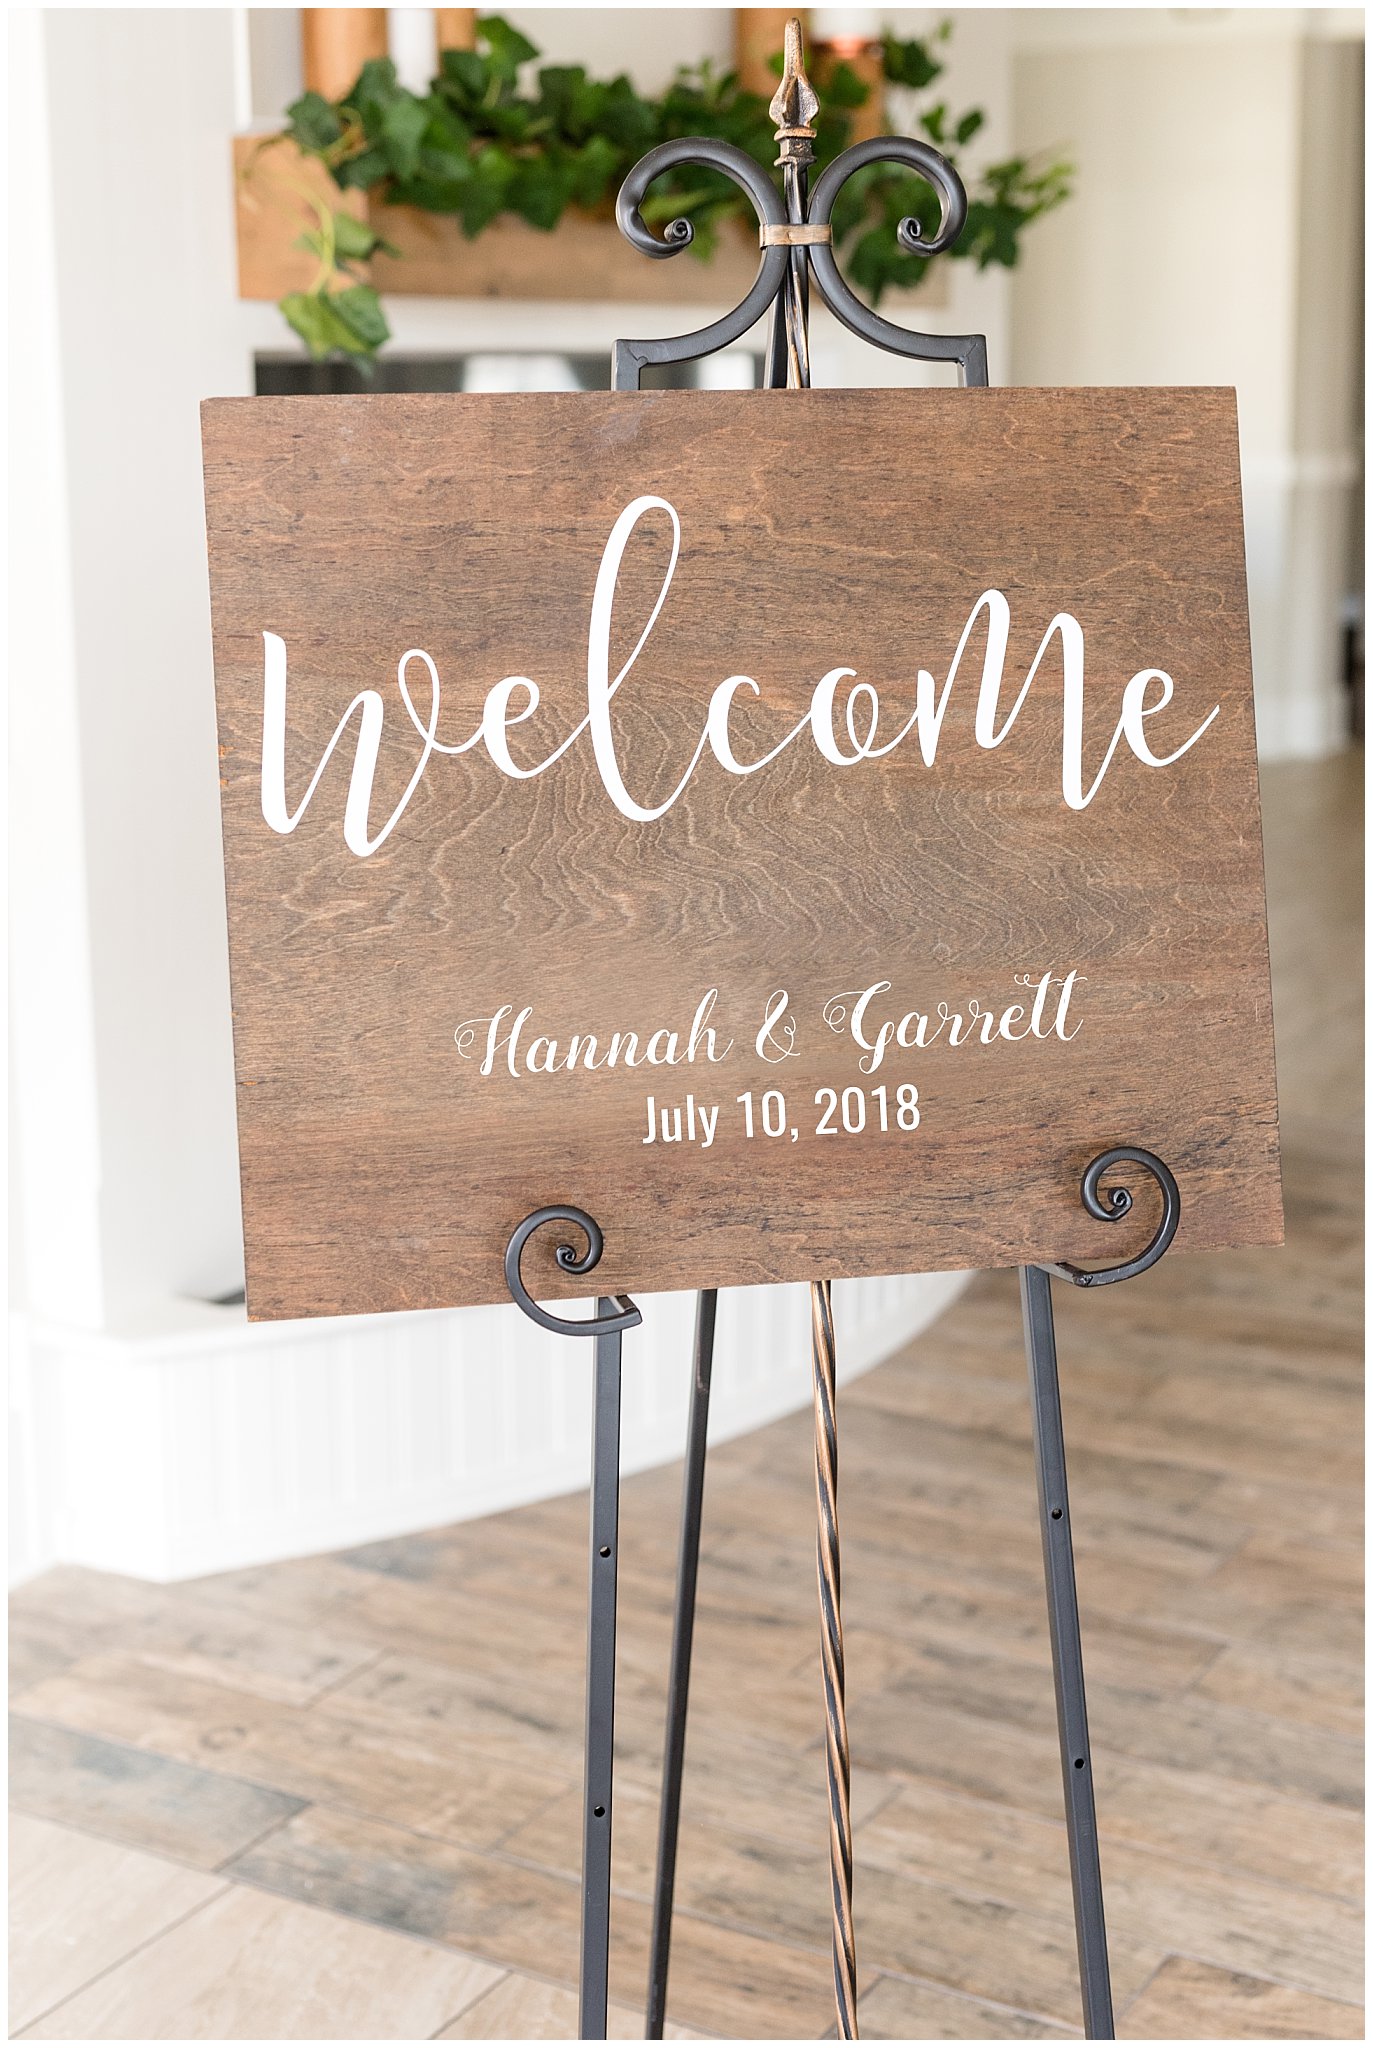 Welcome to wedding sign on wood with vinyl lettering | Talia Event Center